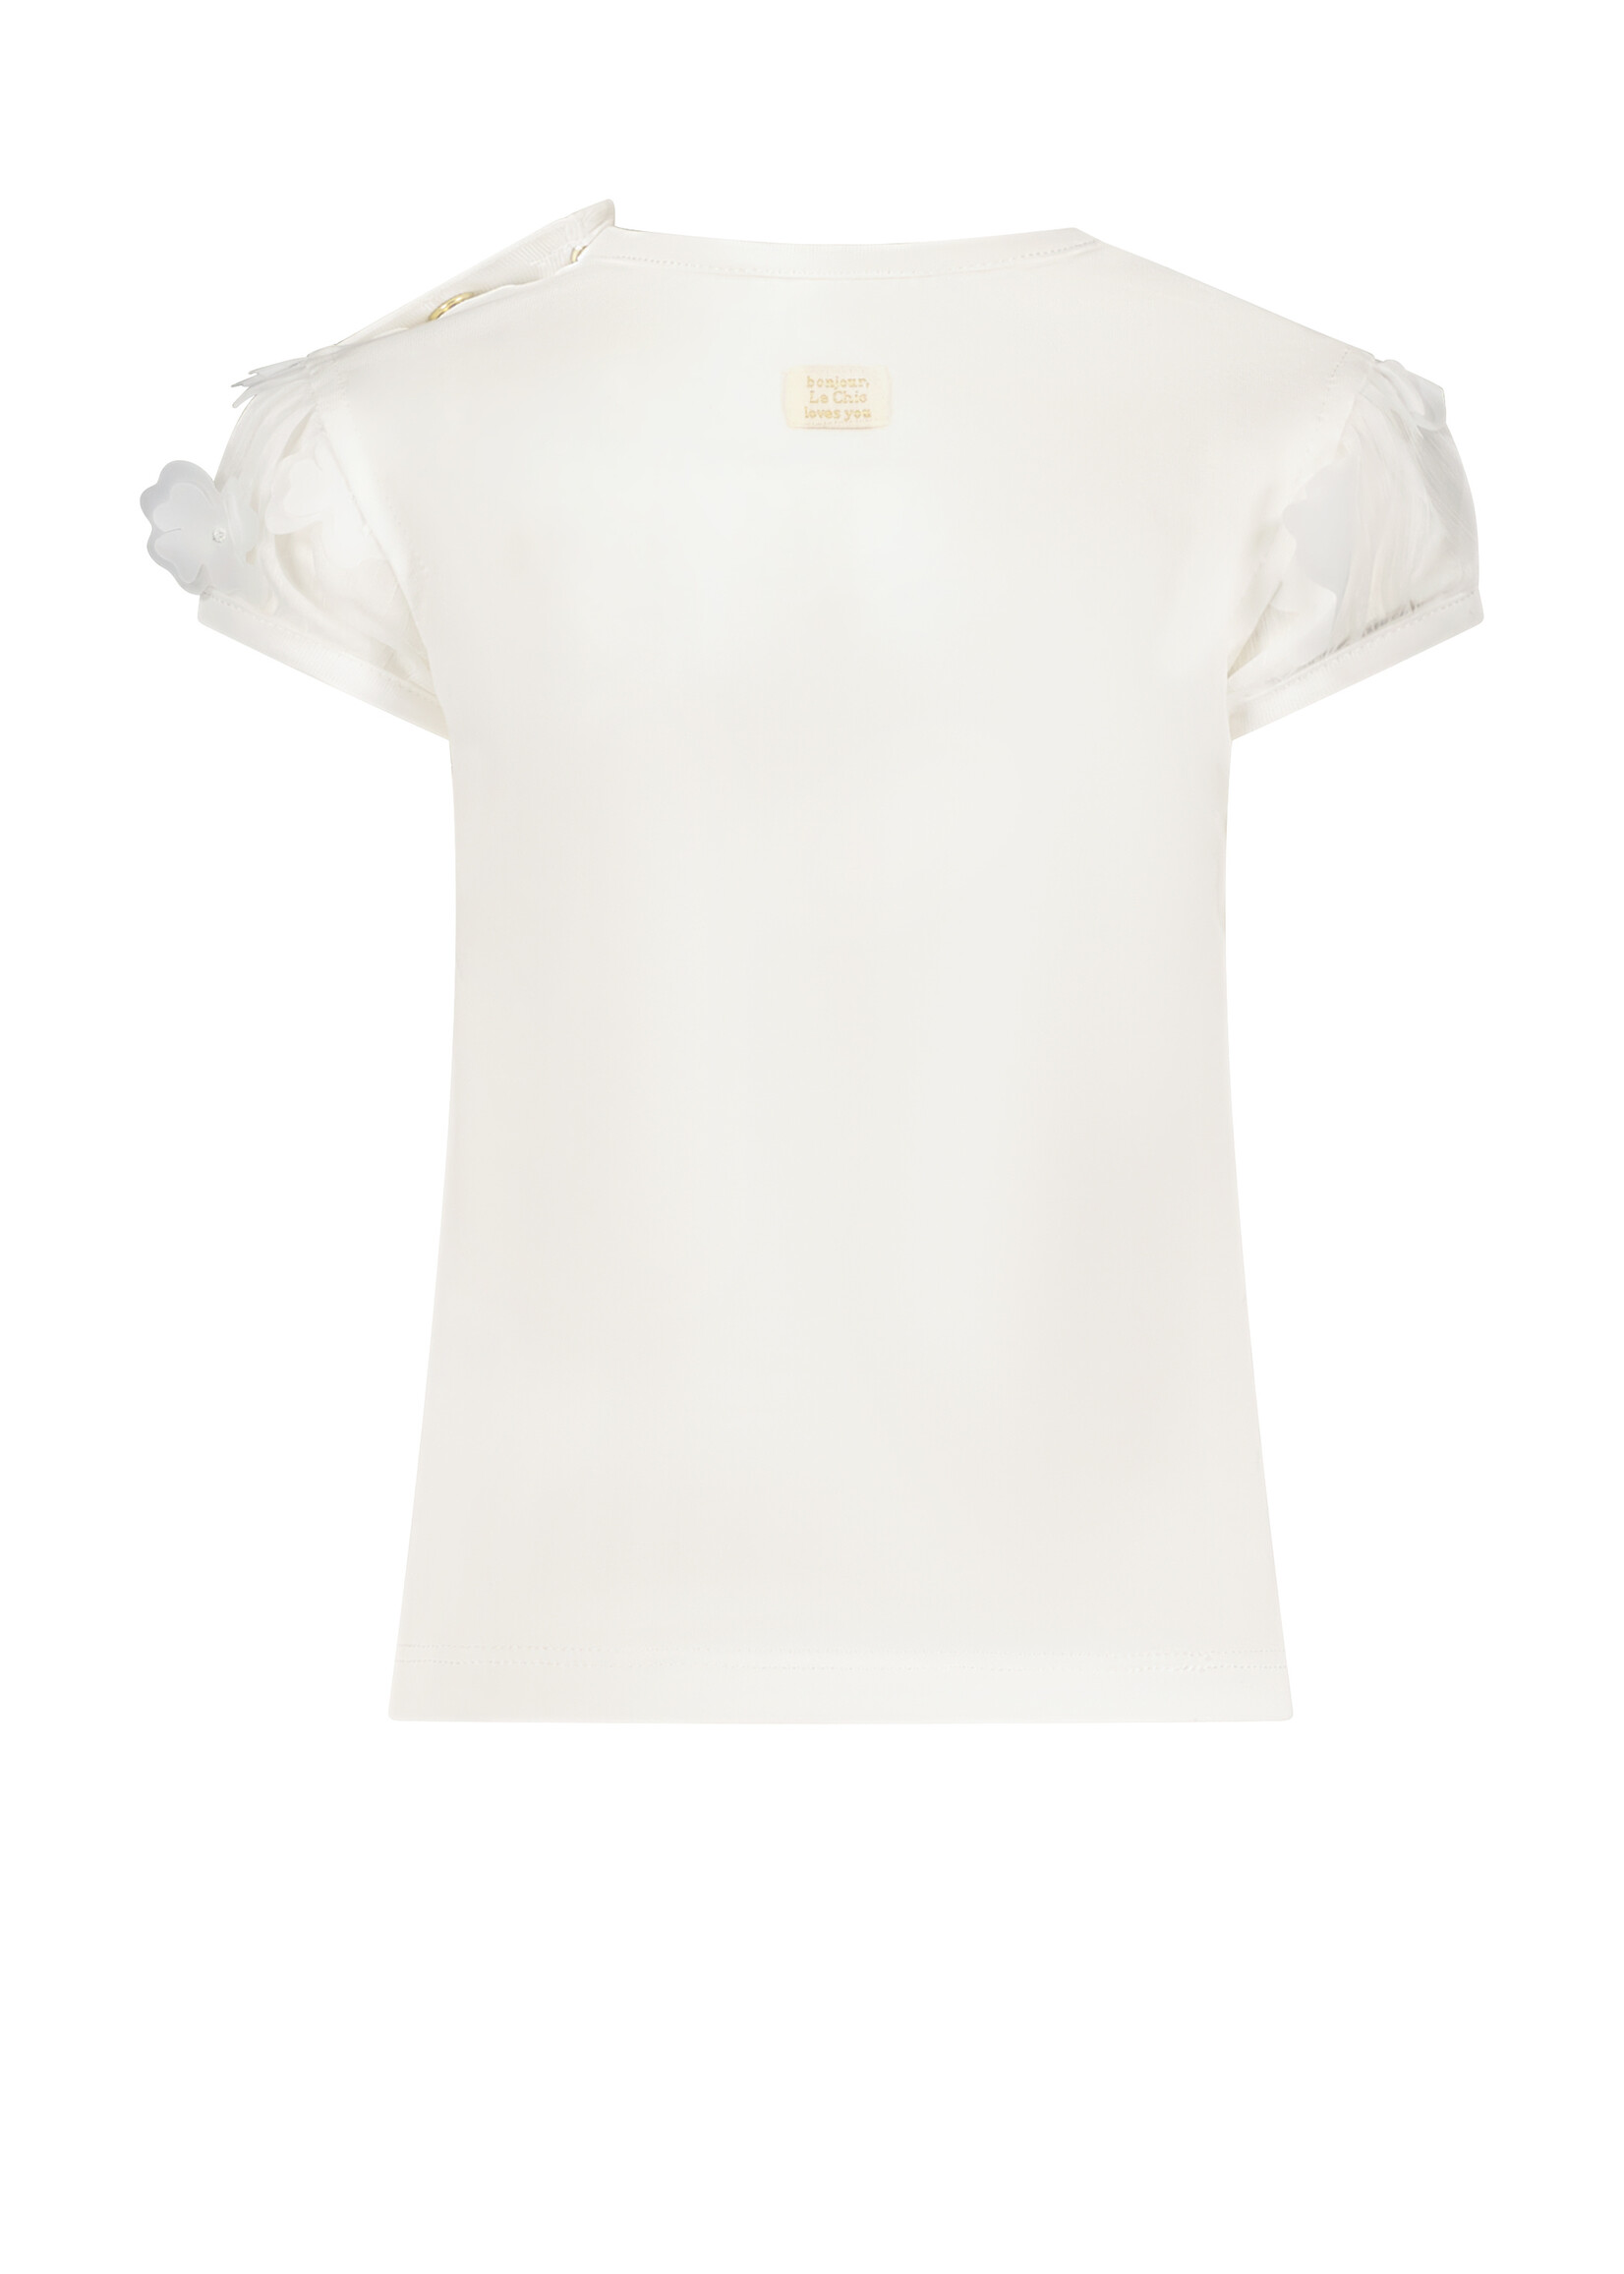 Le Chic Girls Baby C312-7400 NOSHLY flower voile T-shirt Off White